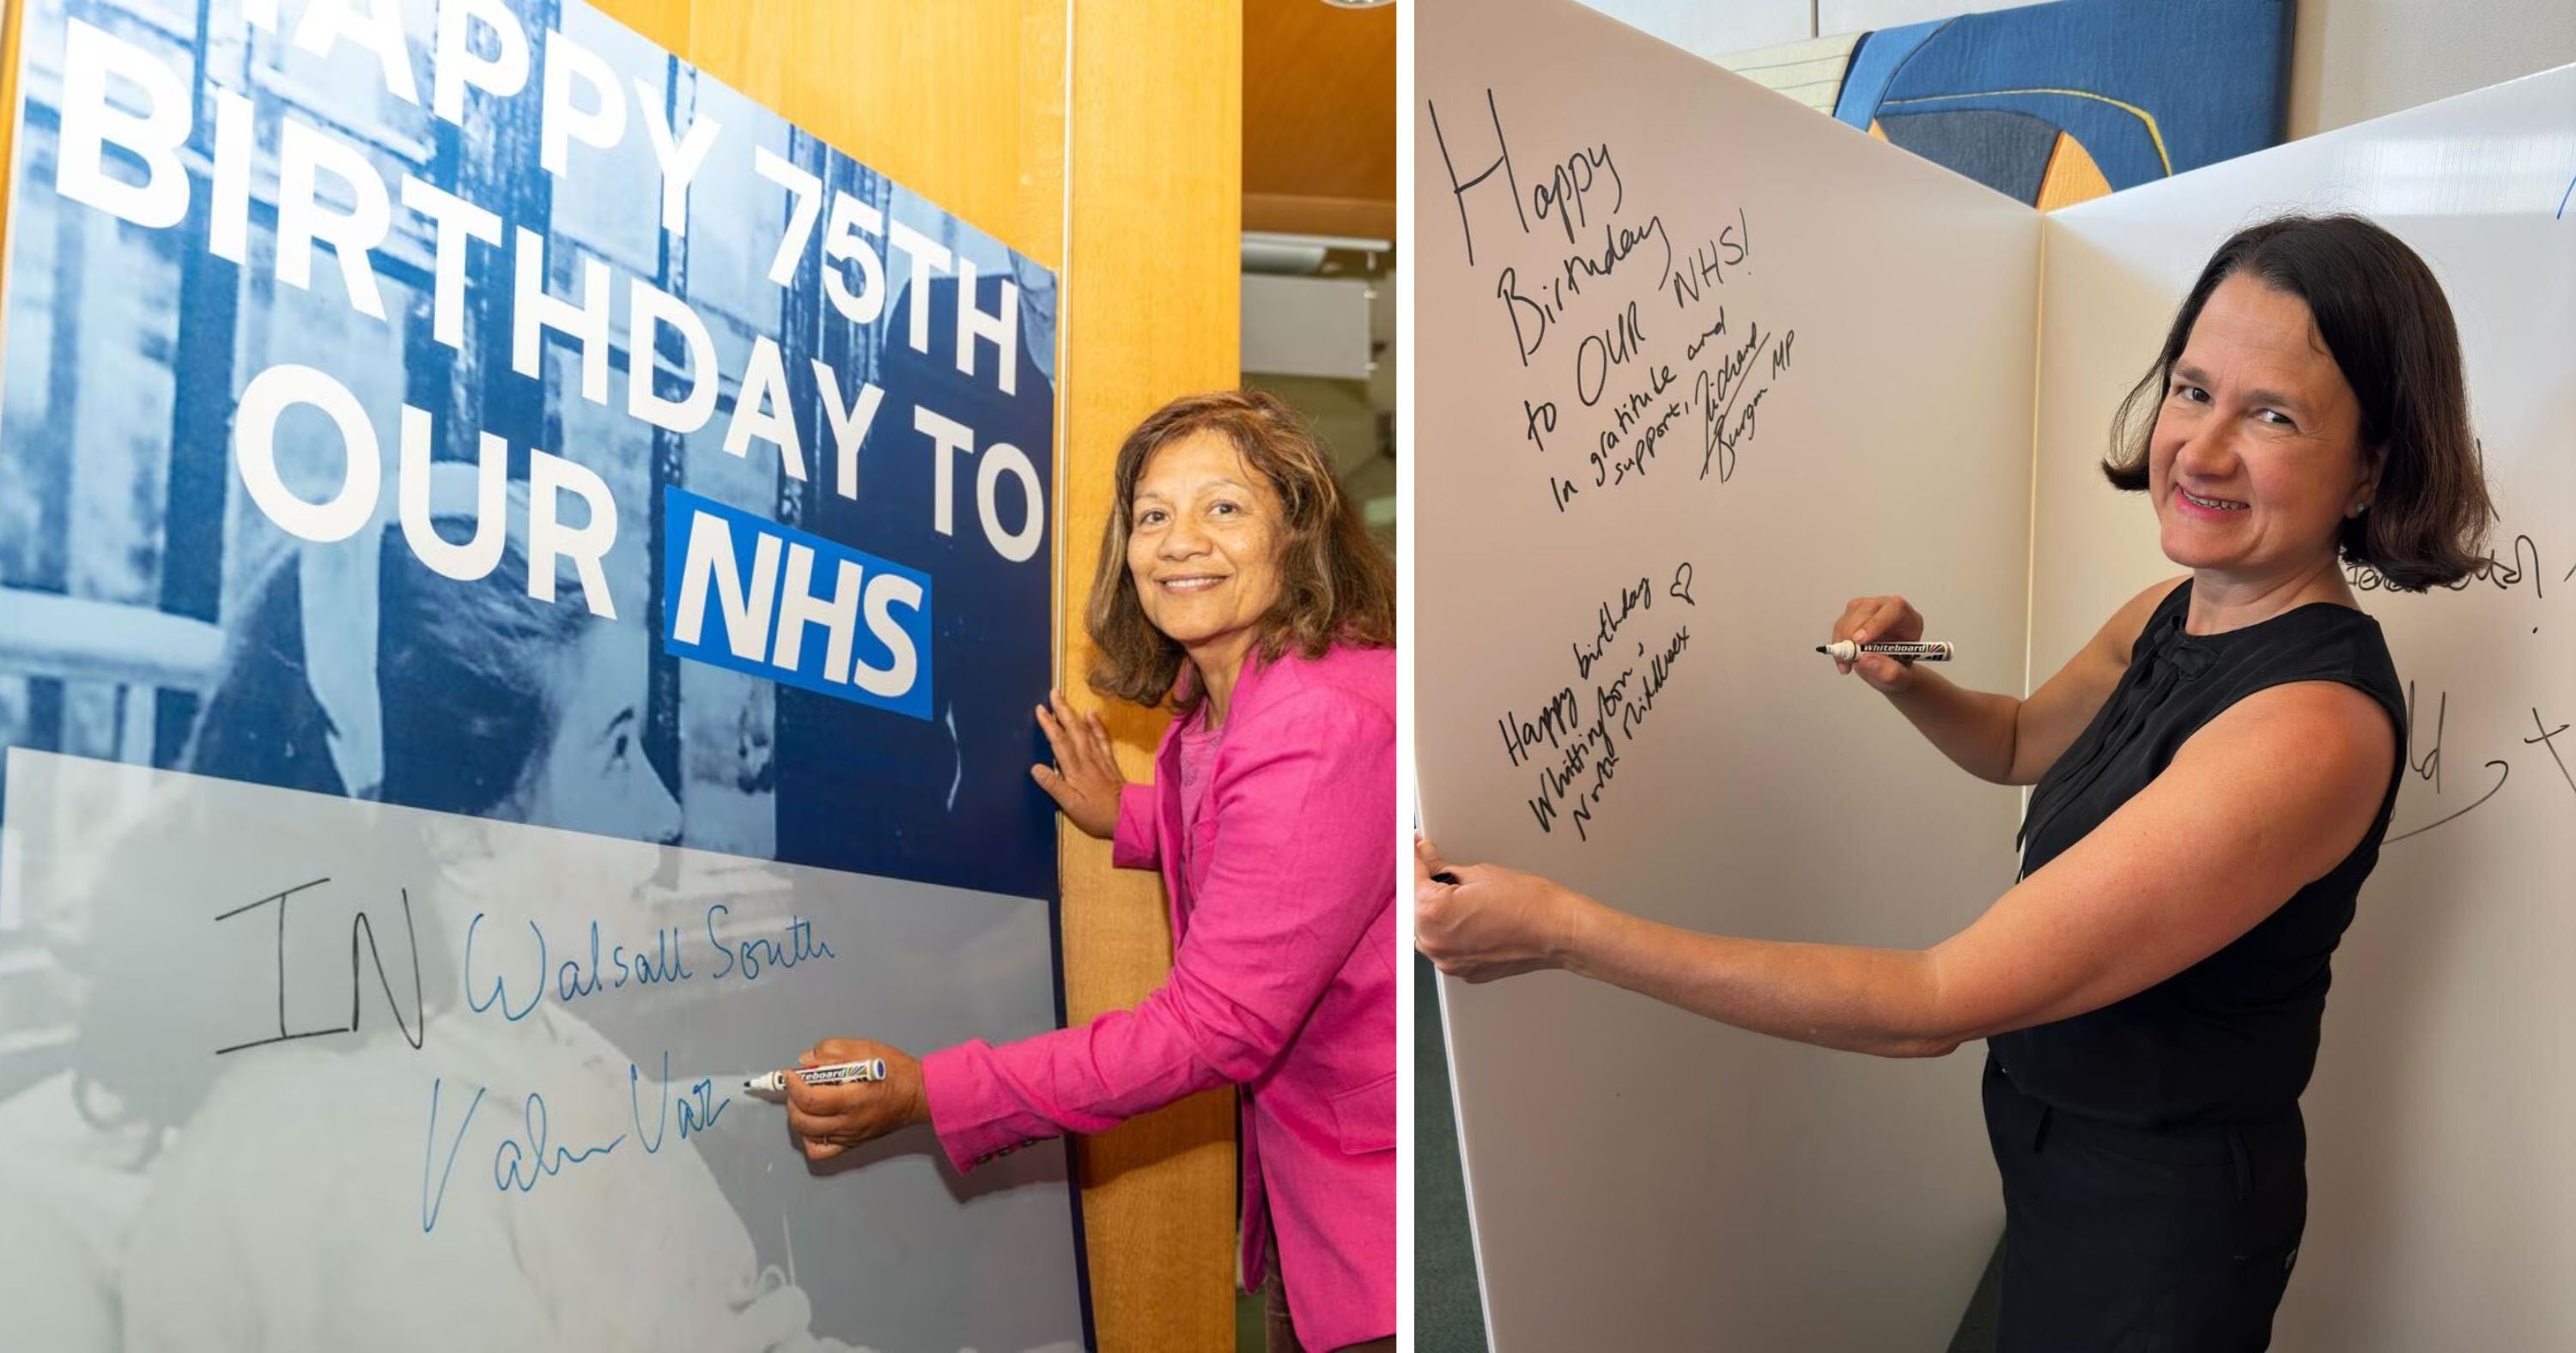 members of parliament signing NHS giant card for 75th birthday